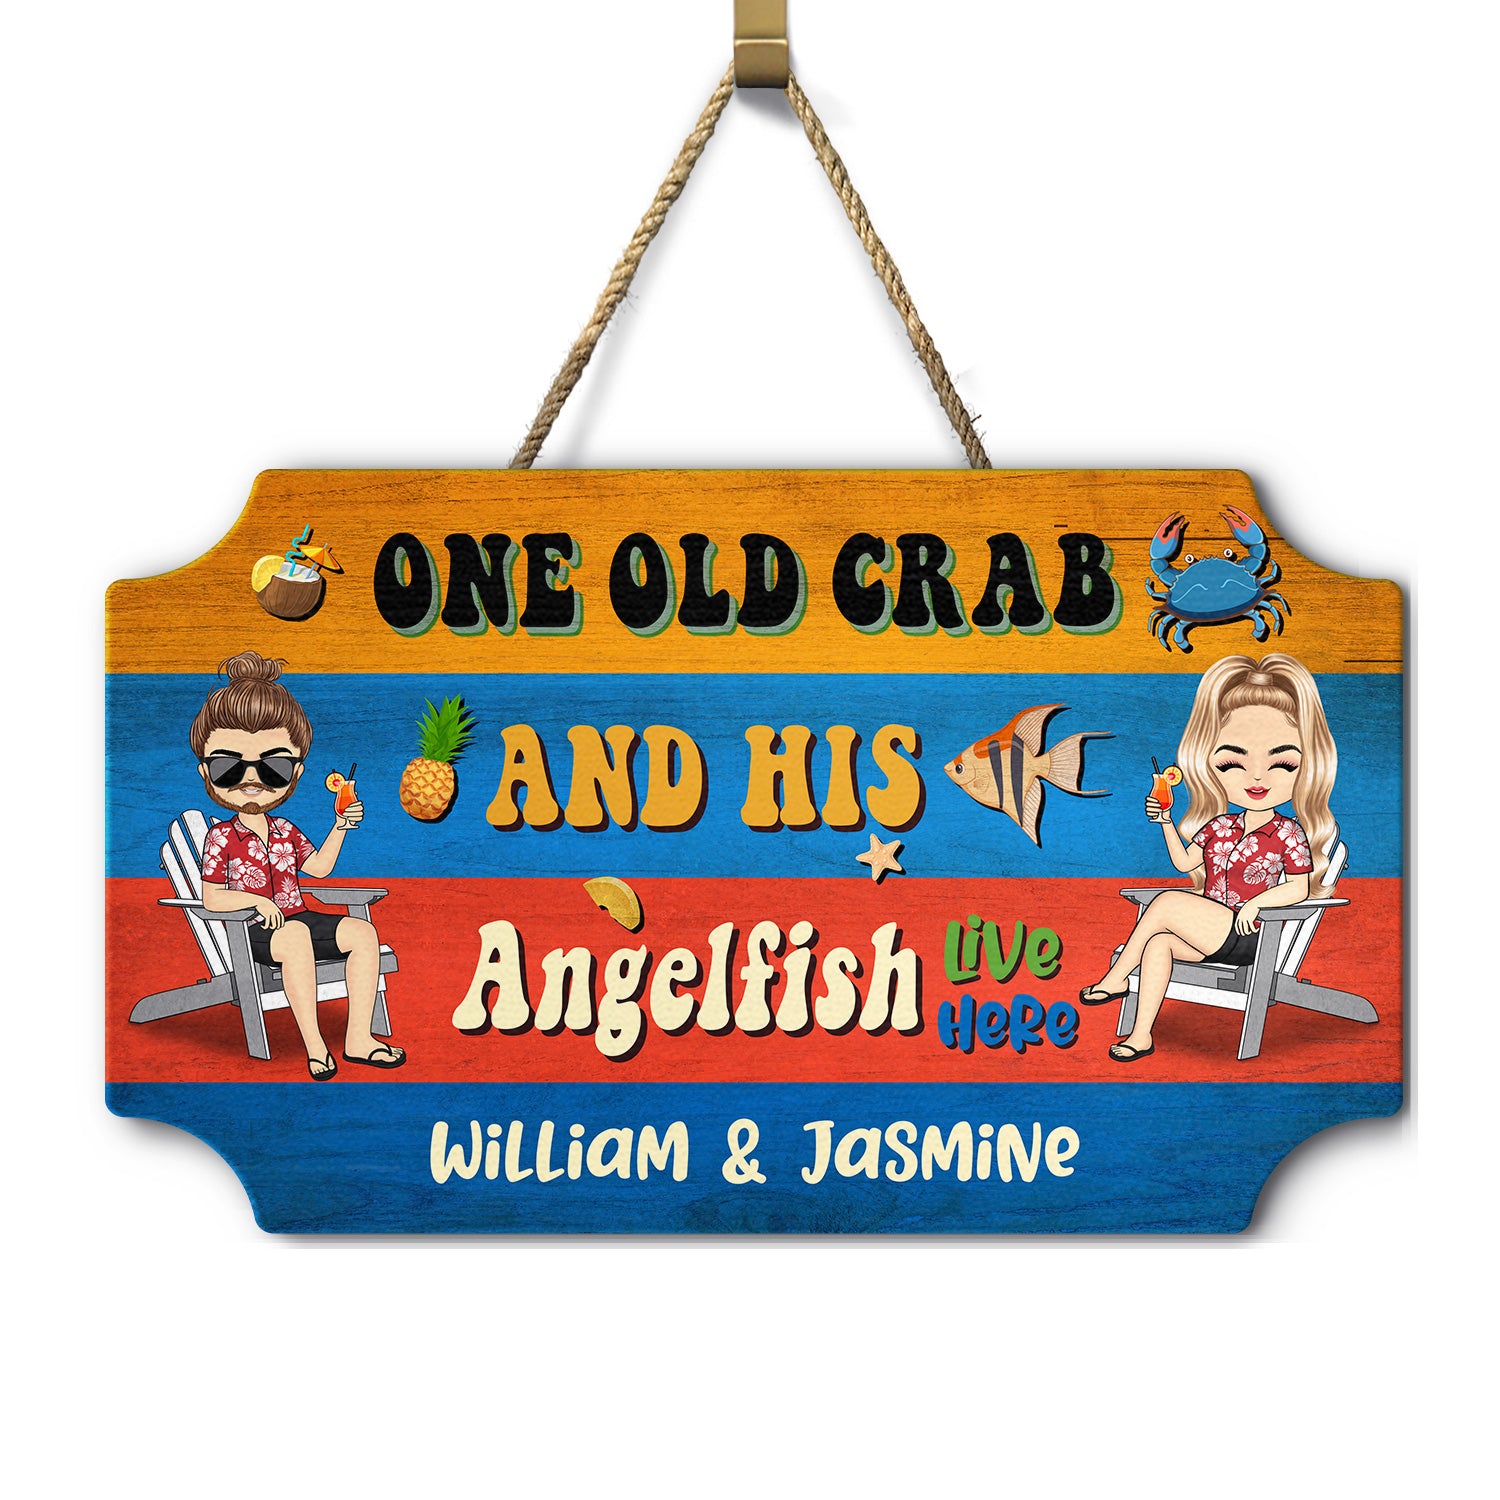 Couple Old Crab & His Angel Fish Live Here - Gift For Couple - Personalized Custom Shaped Wood Sign